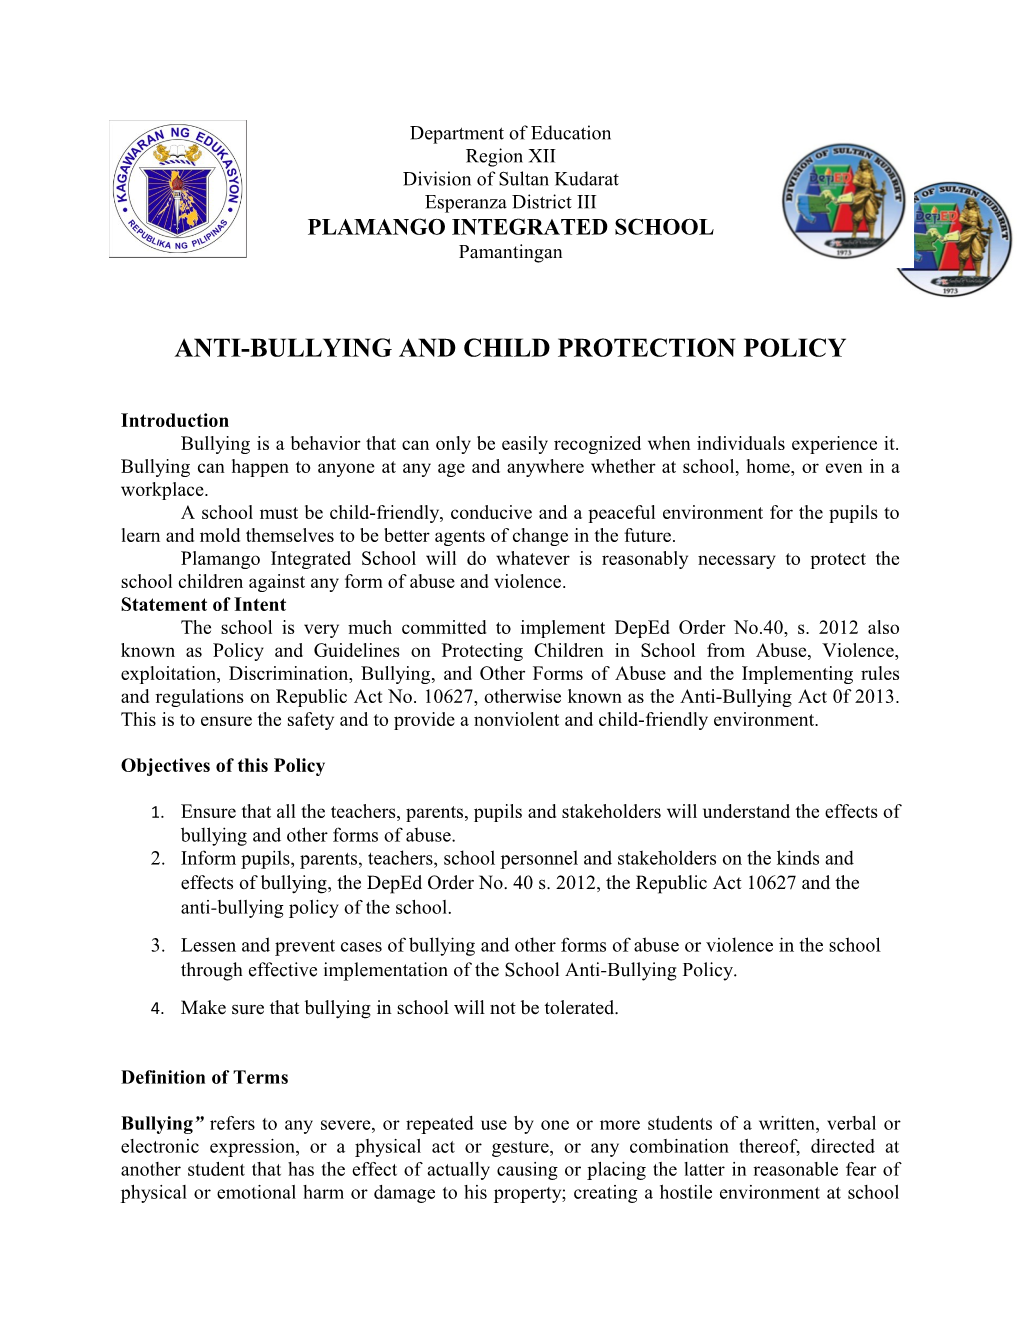 Anti-Bullying and Child Protection Policy